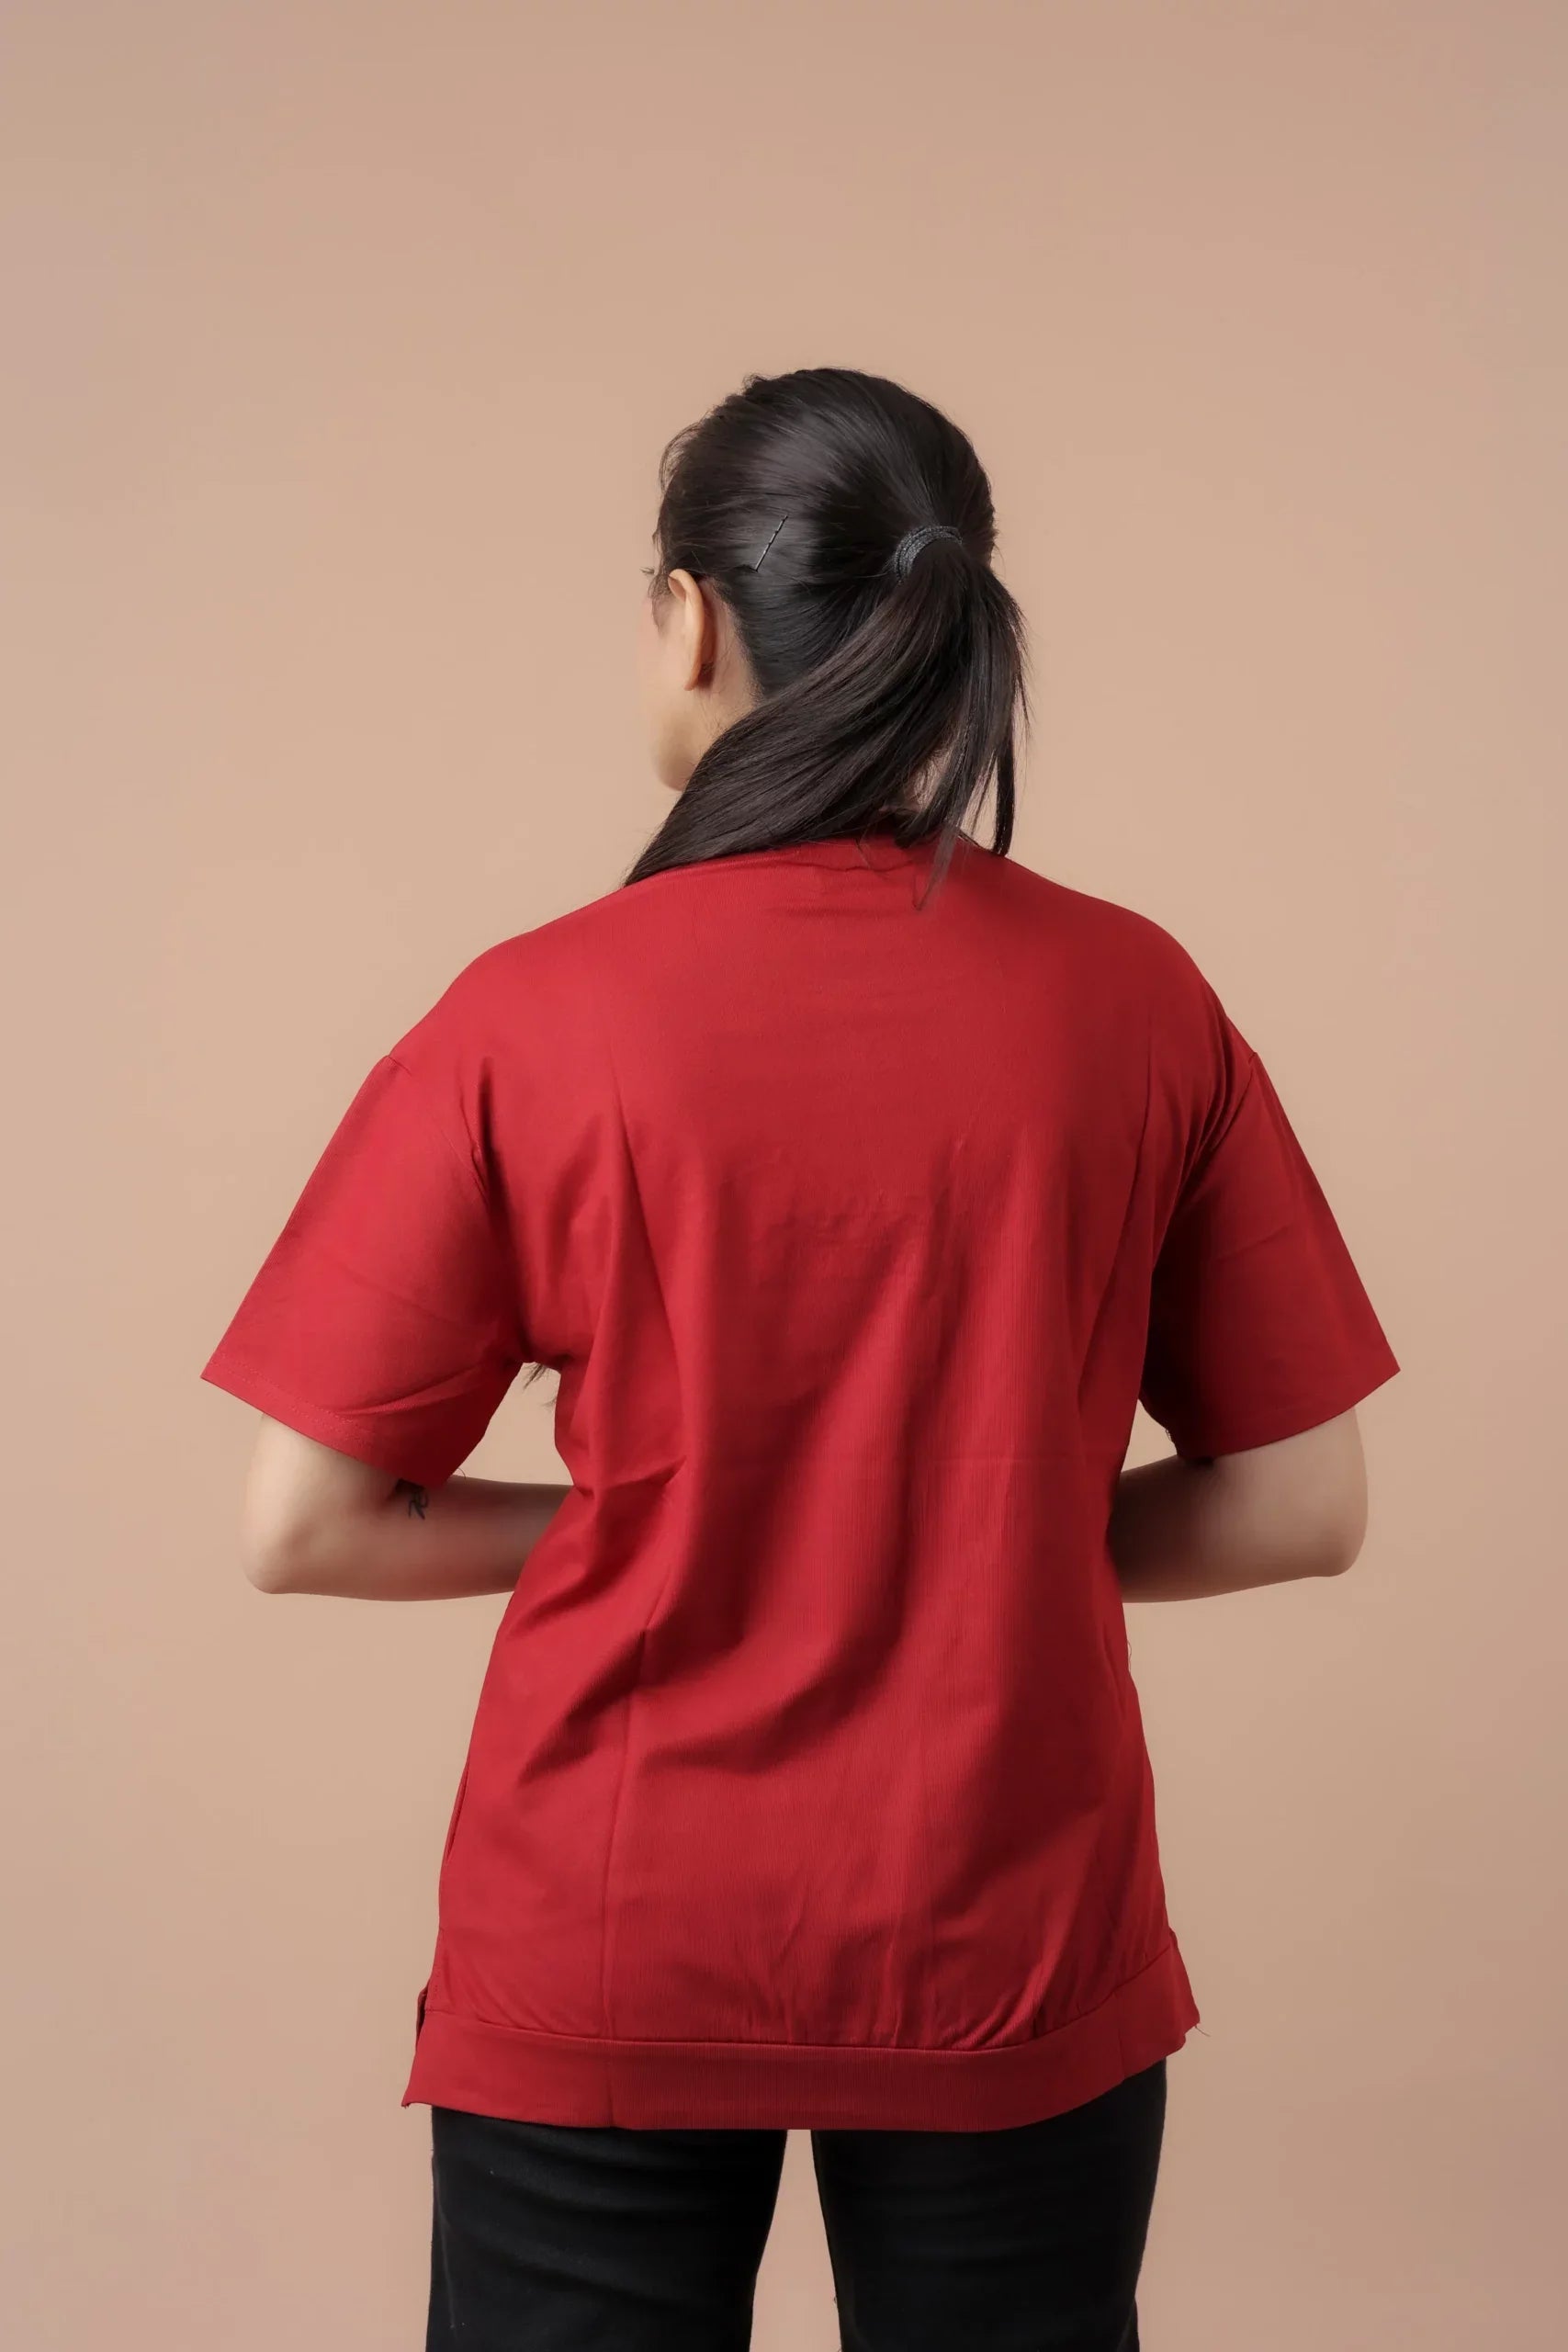 Chocolate Embroided Loose fit Tshirt (Cherry Shade)  Fusion of Elegance and Comfort!